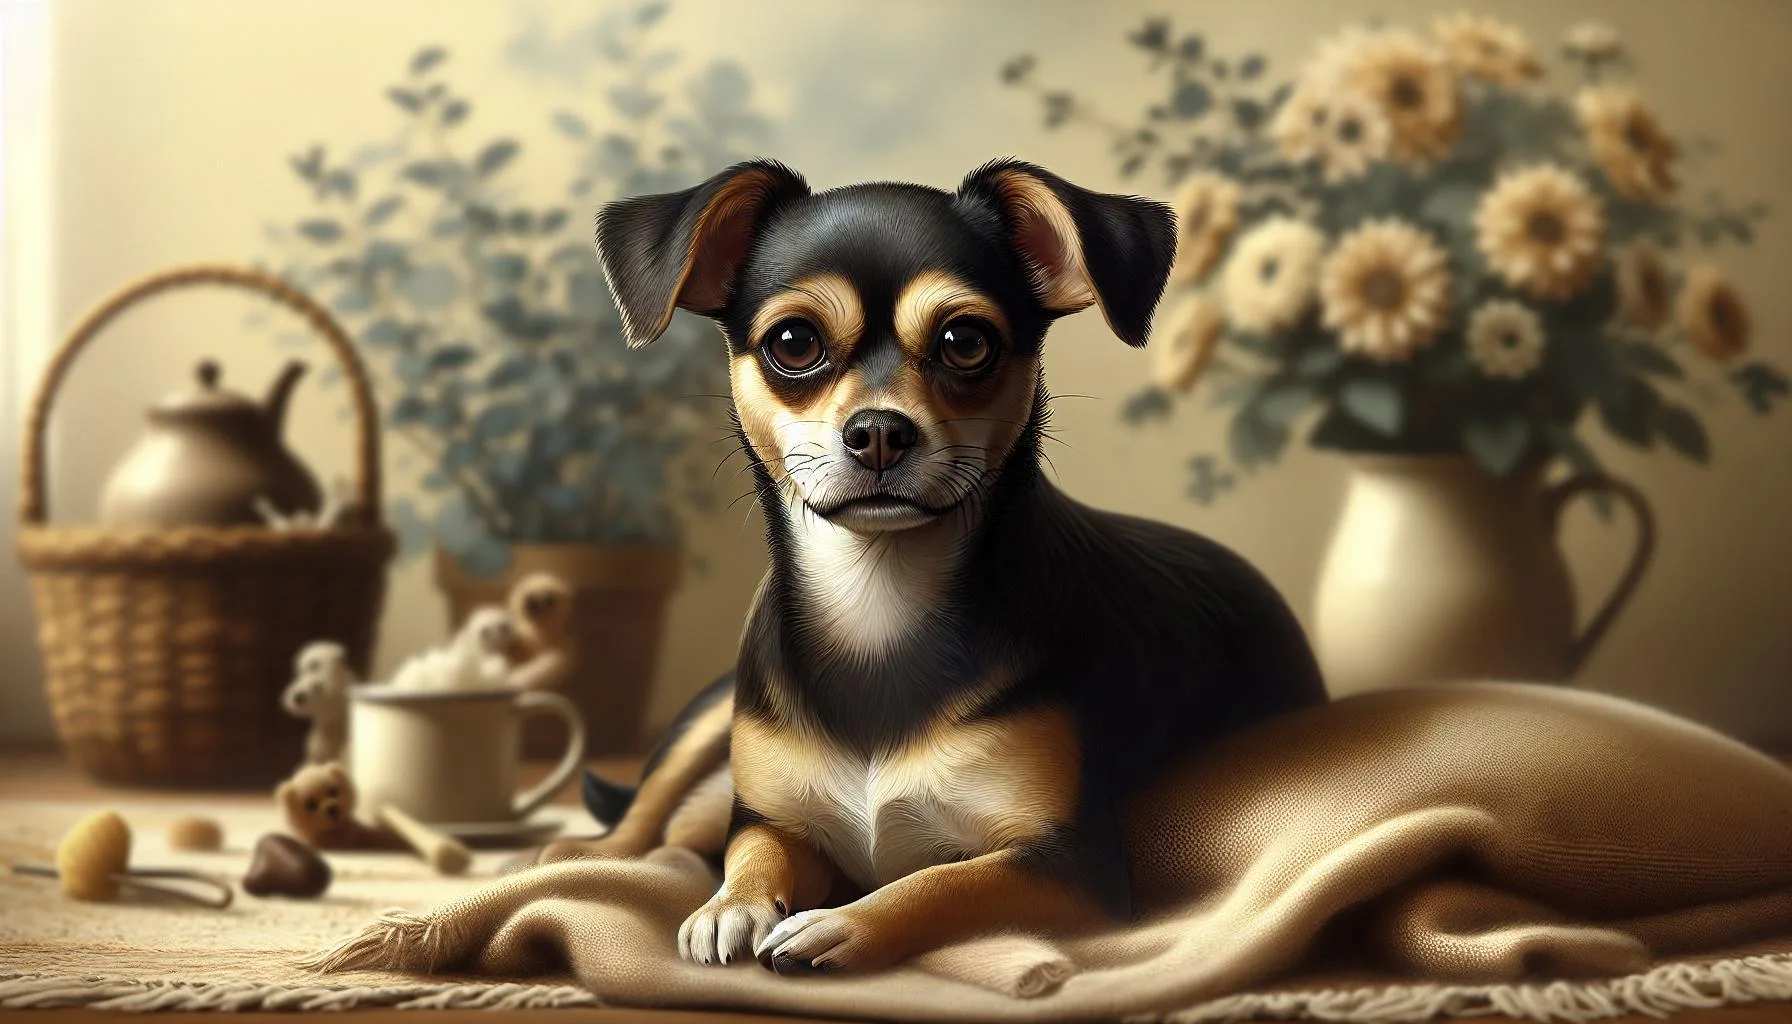 Chiweenie Chihuahua Pug Mix: Meet Your New Pal!